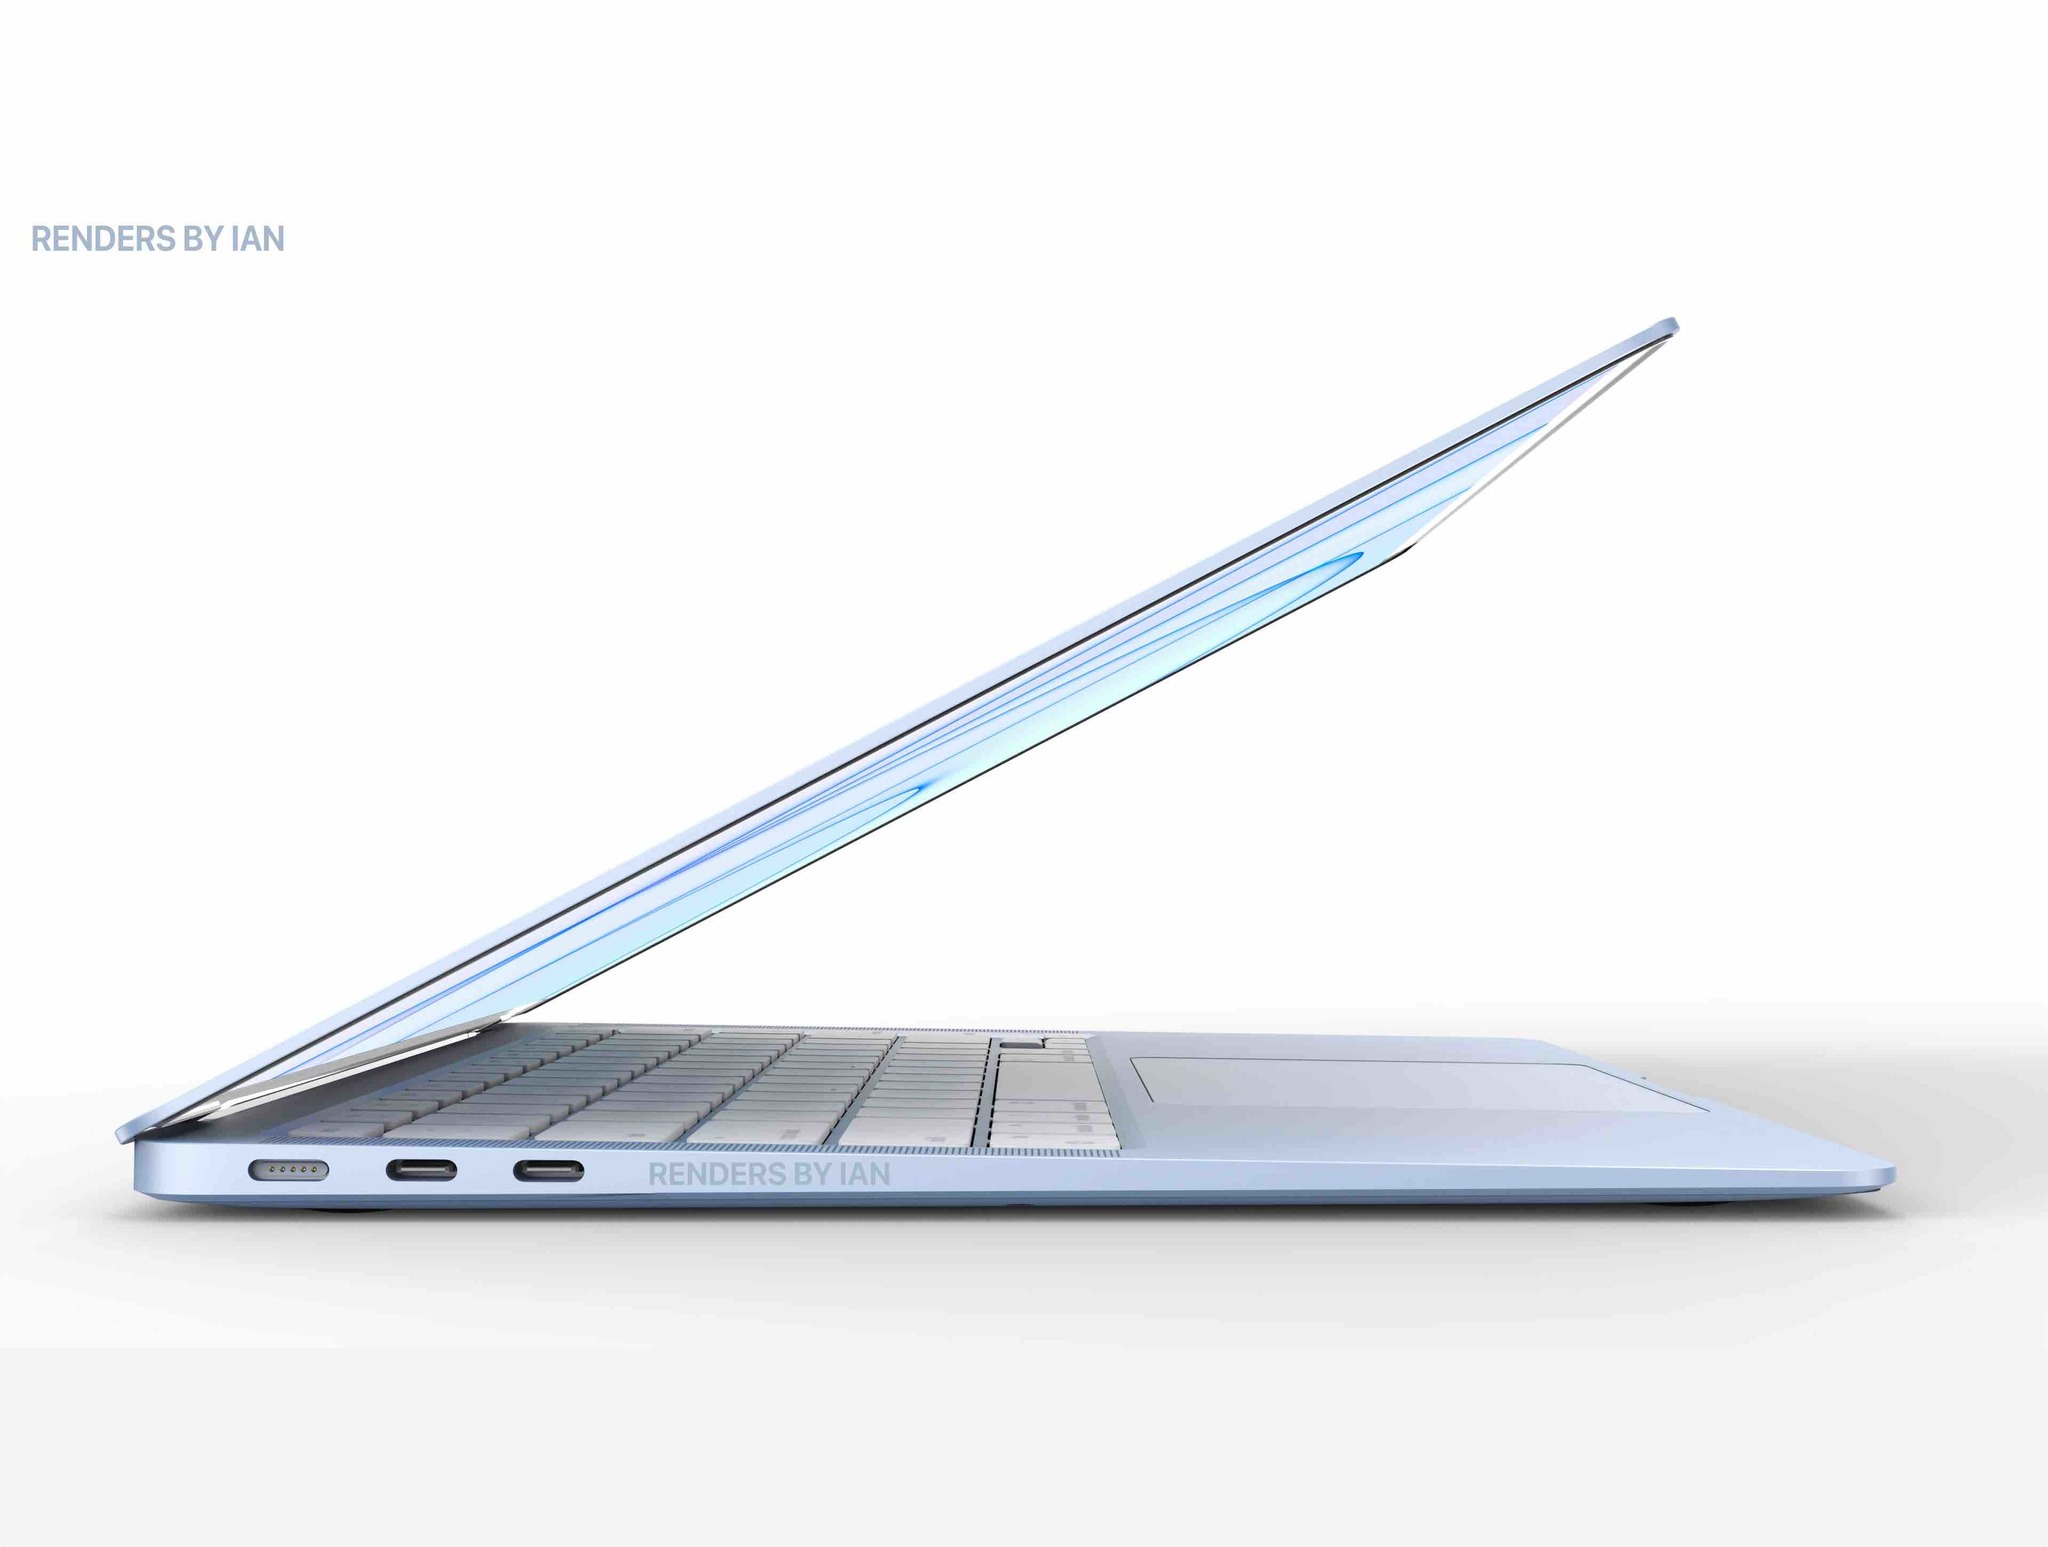 2021 MacBook Air to feature a slab like flat design. Courtesy: iMore